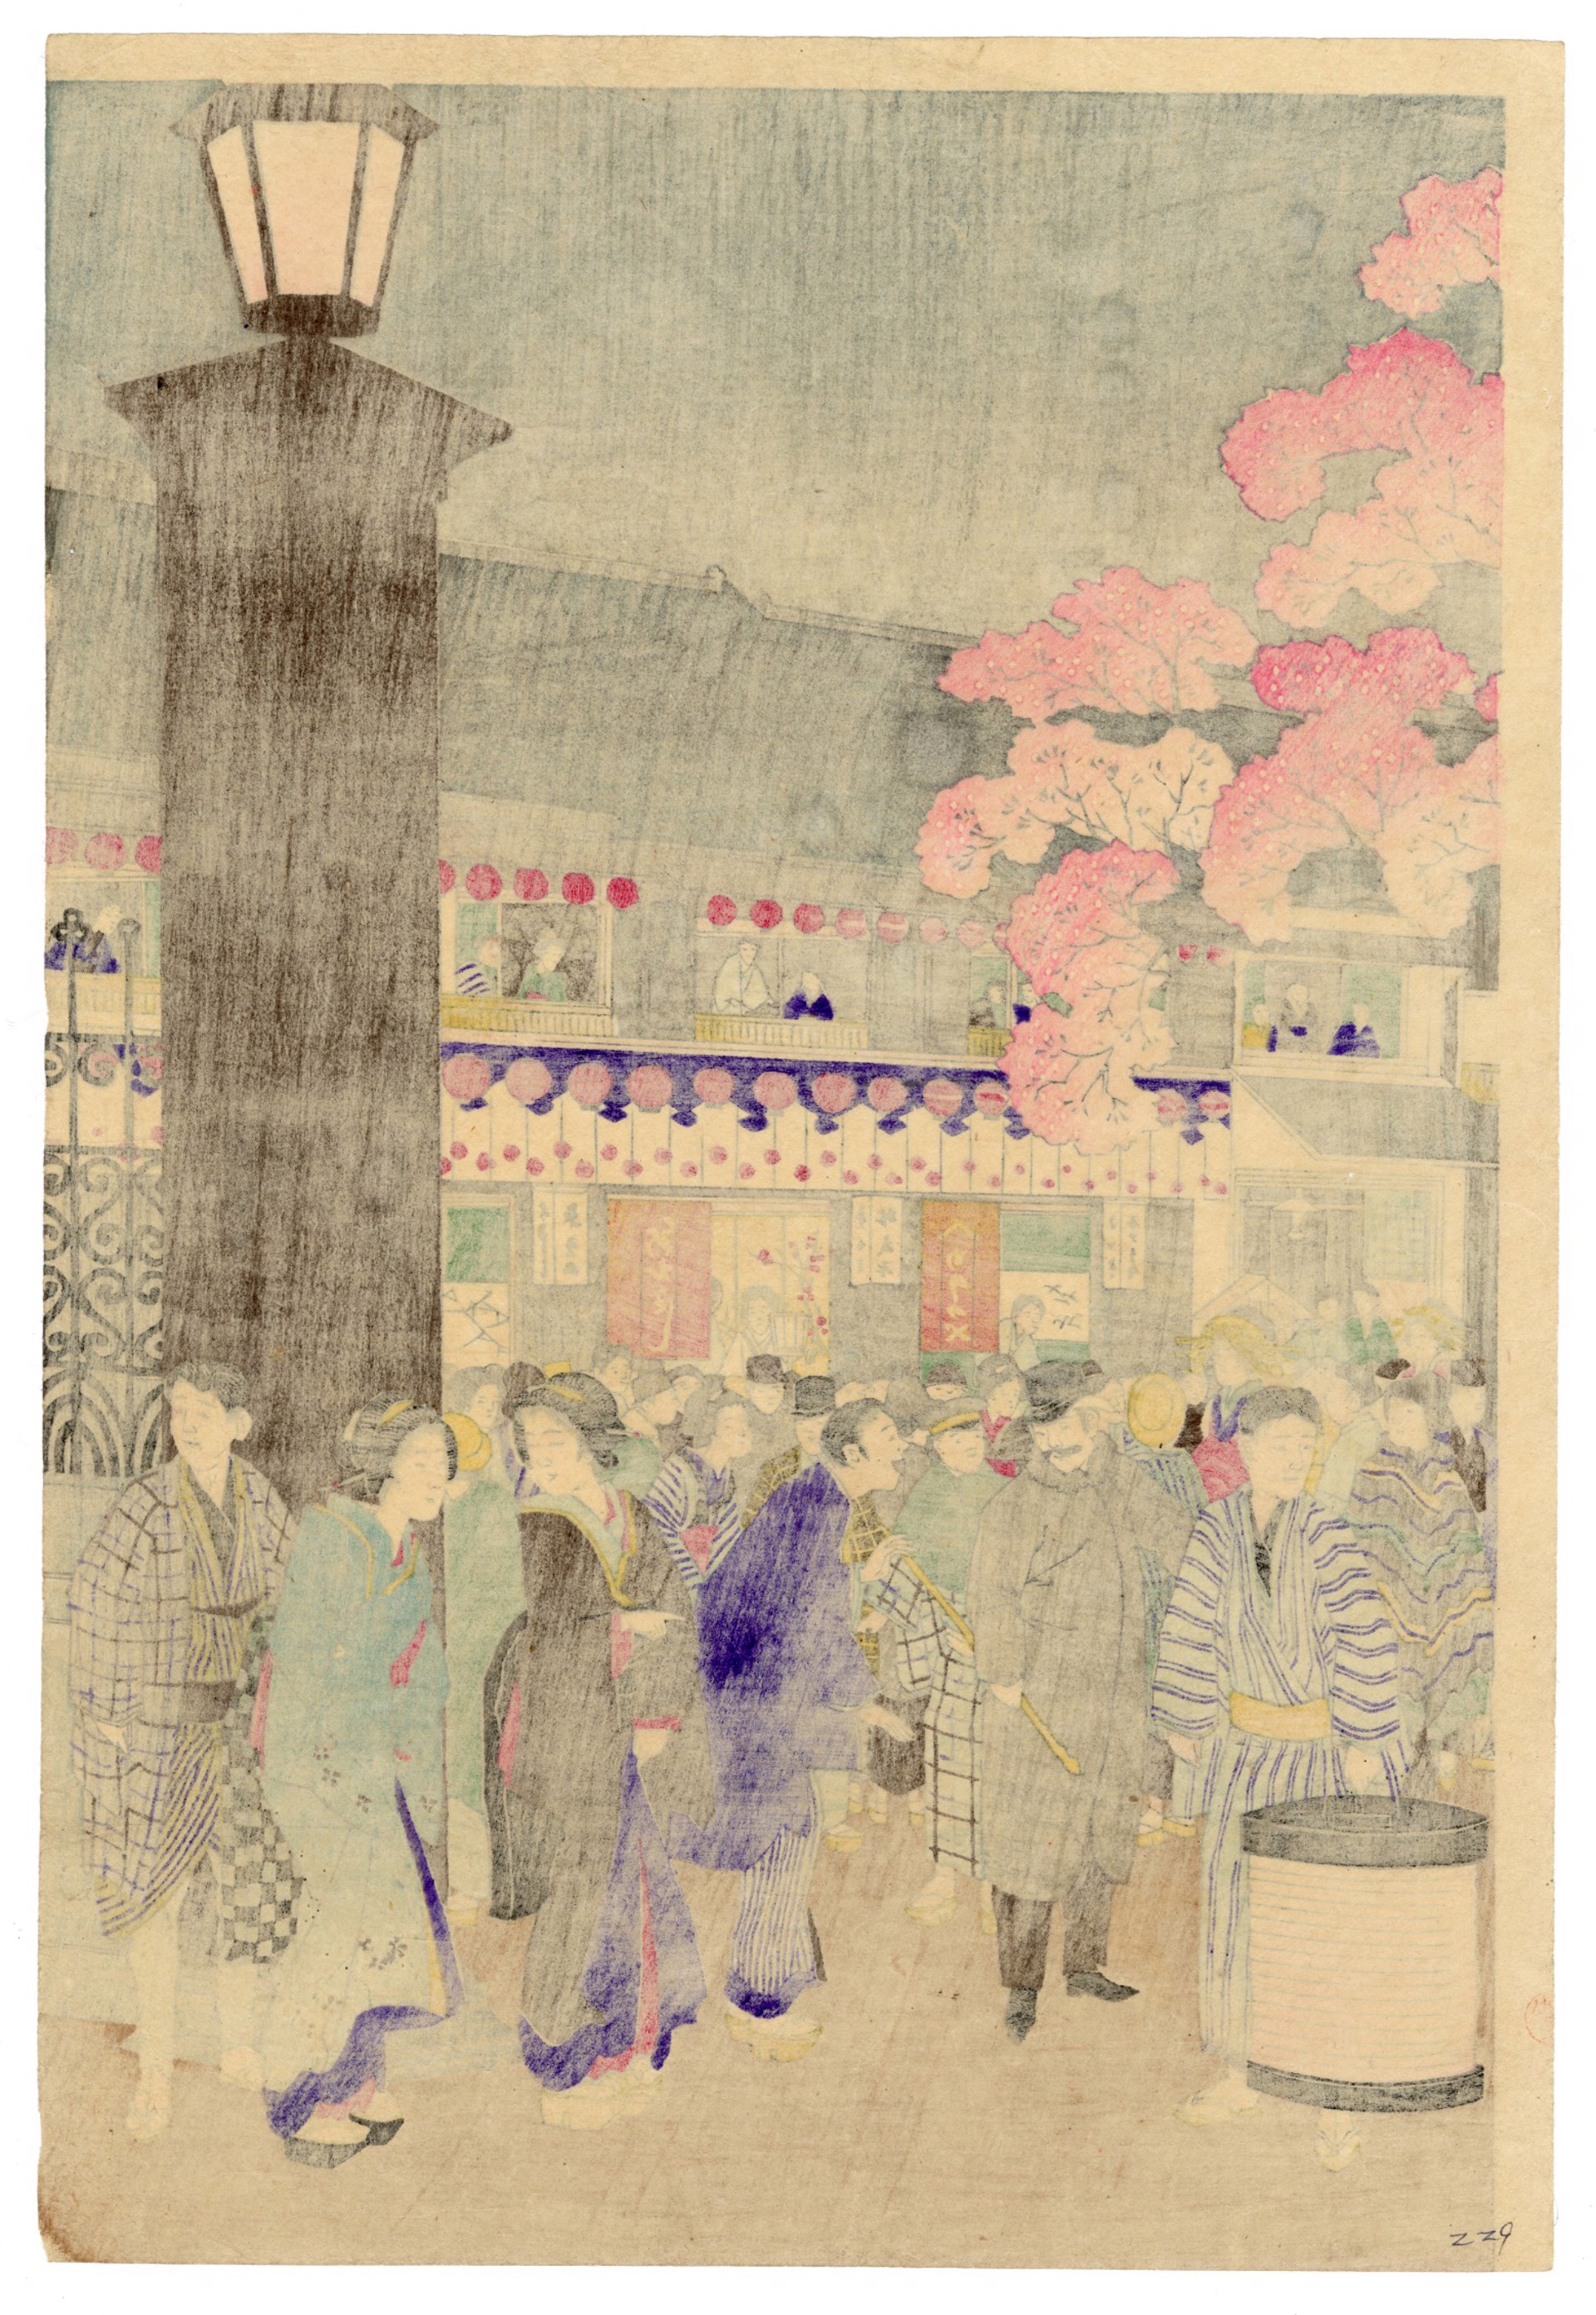 Cherry Blossoms in Full Bloom at Naka-no-cho in the New Yoshiwara by Ikuhide